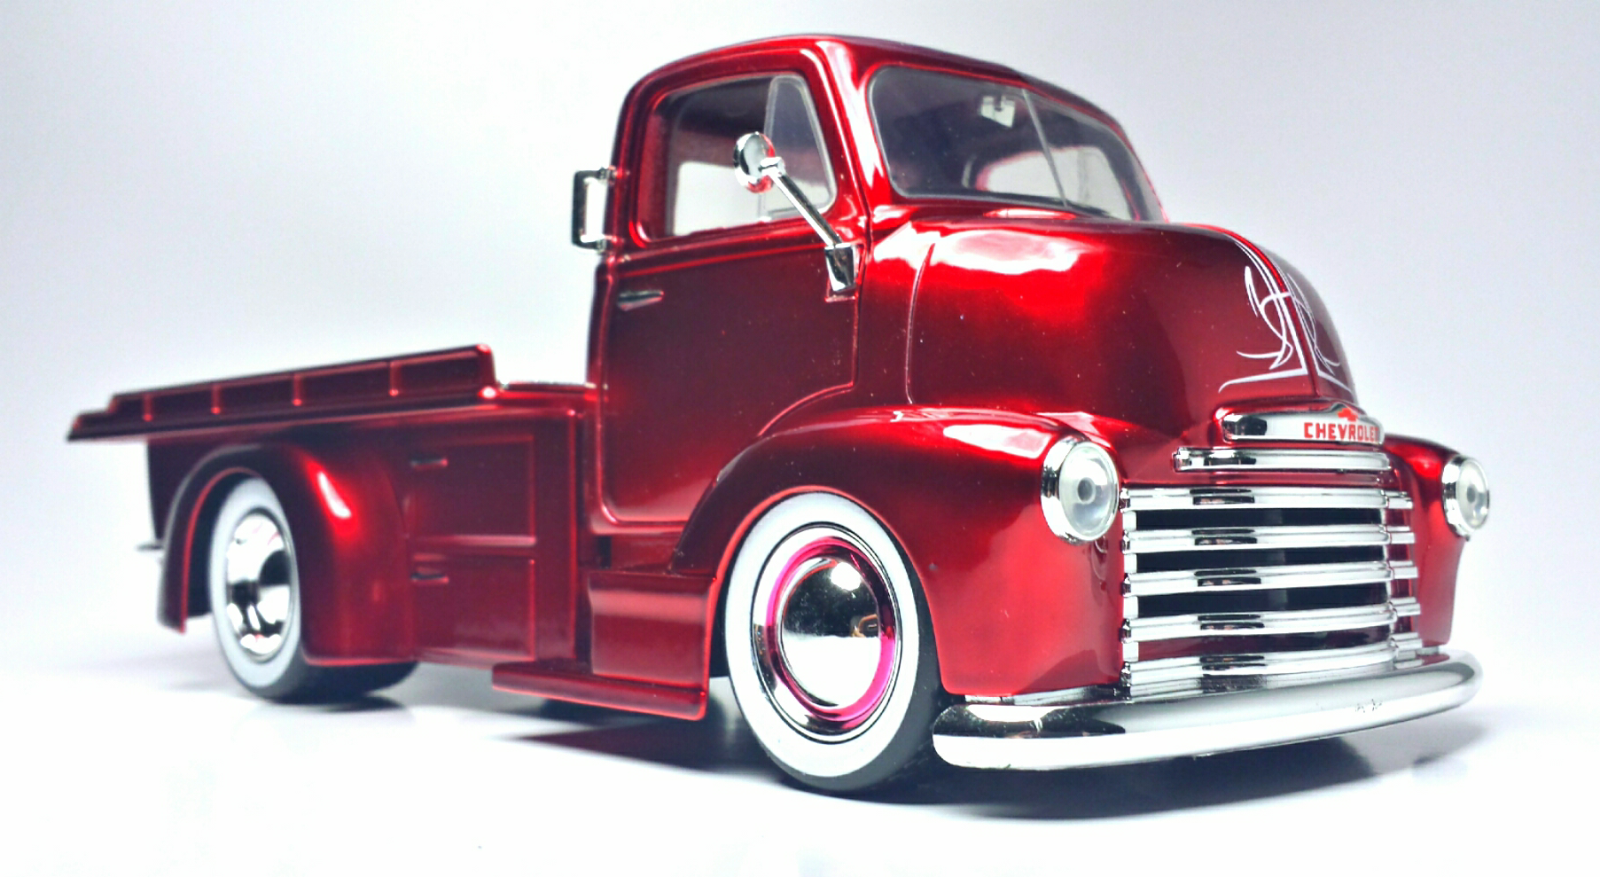 Illustration for article titled Working Wednesday: 1952 Chevy COE Flatbed